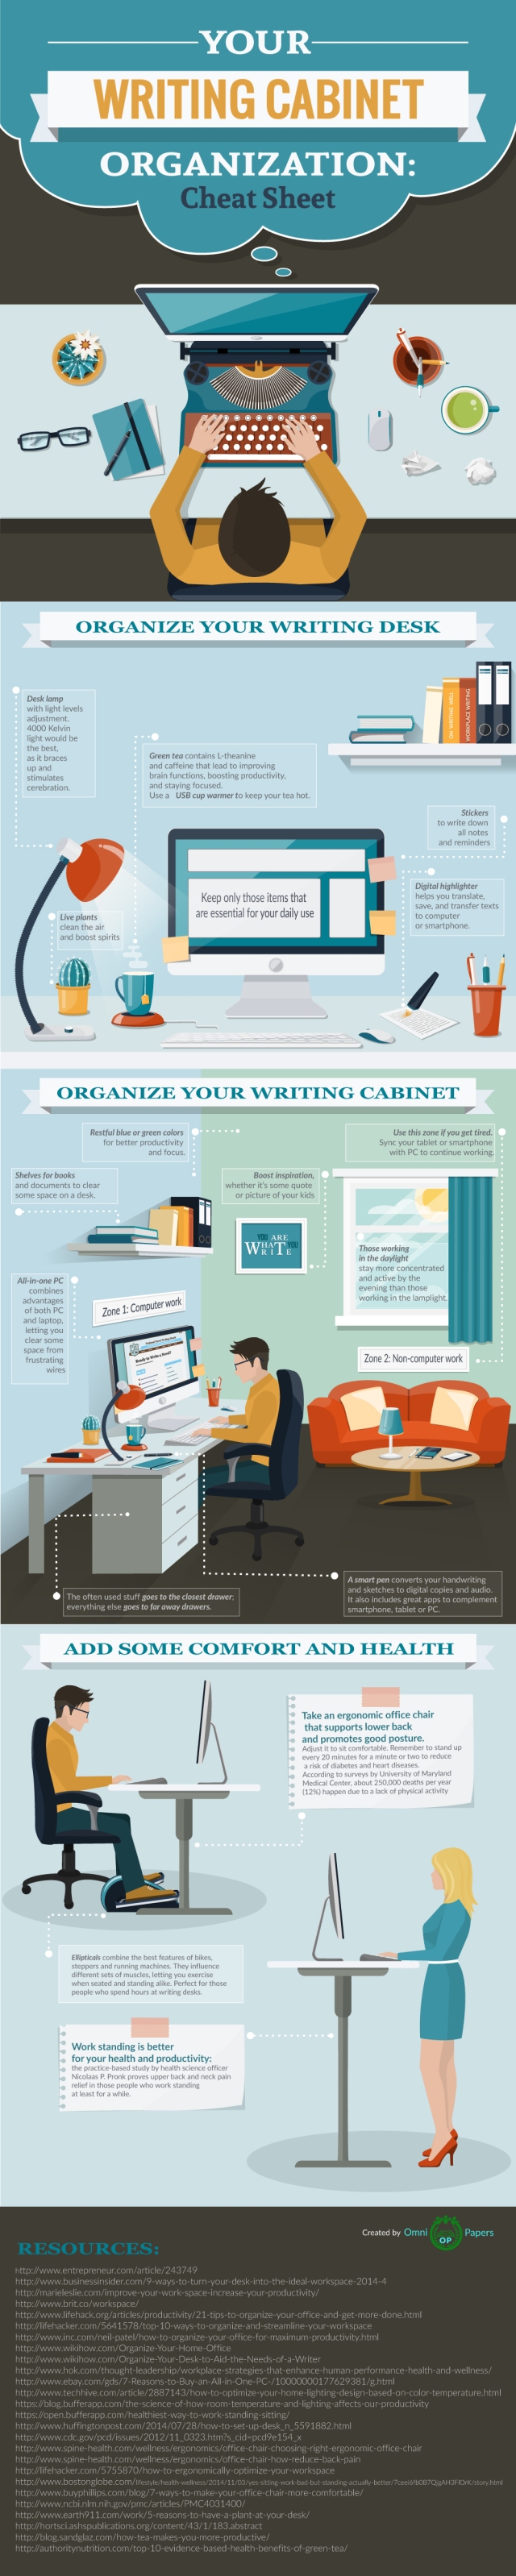 your writing cabinet organization